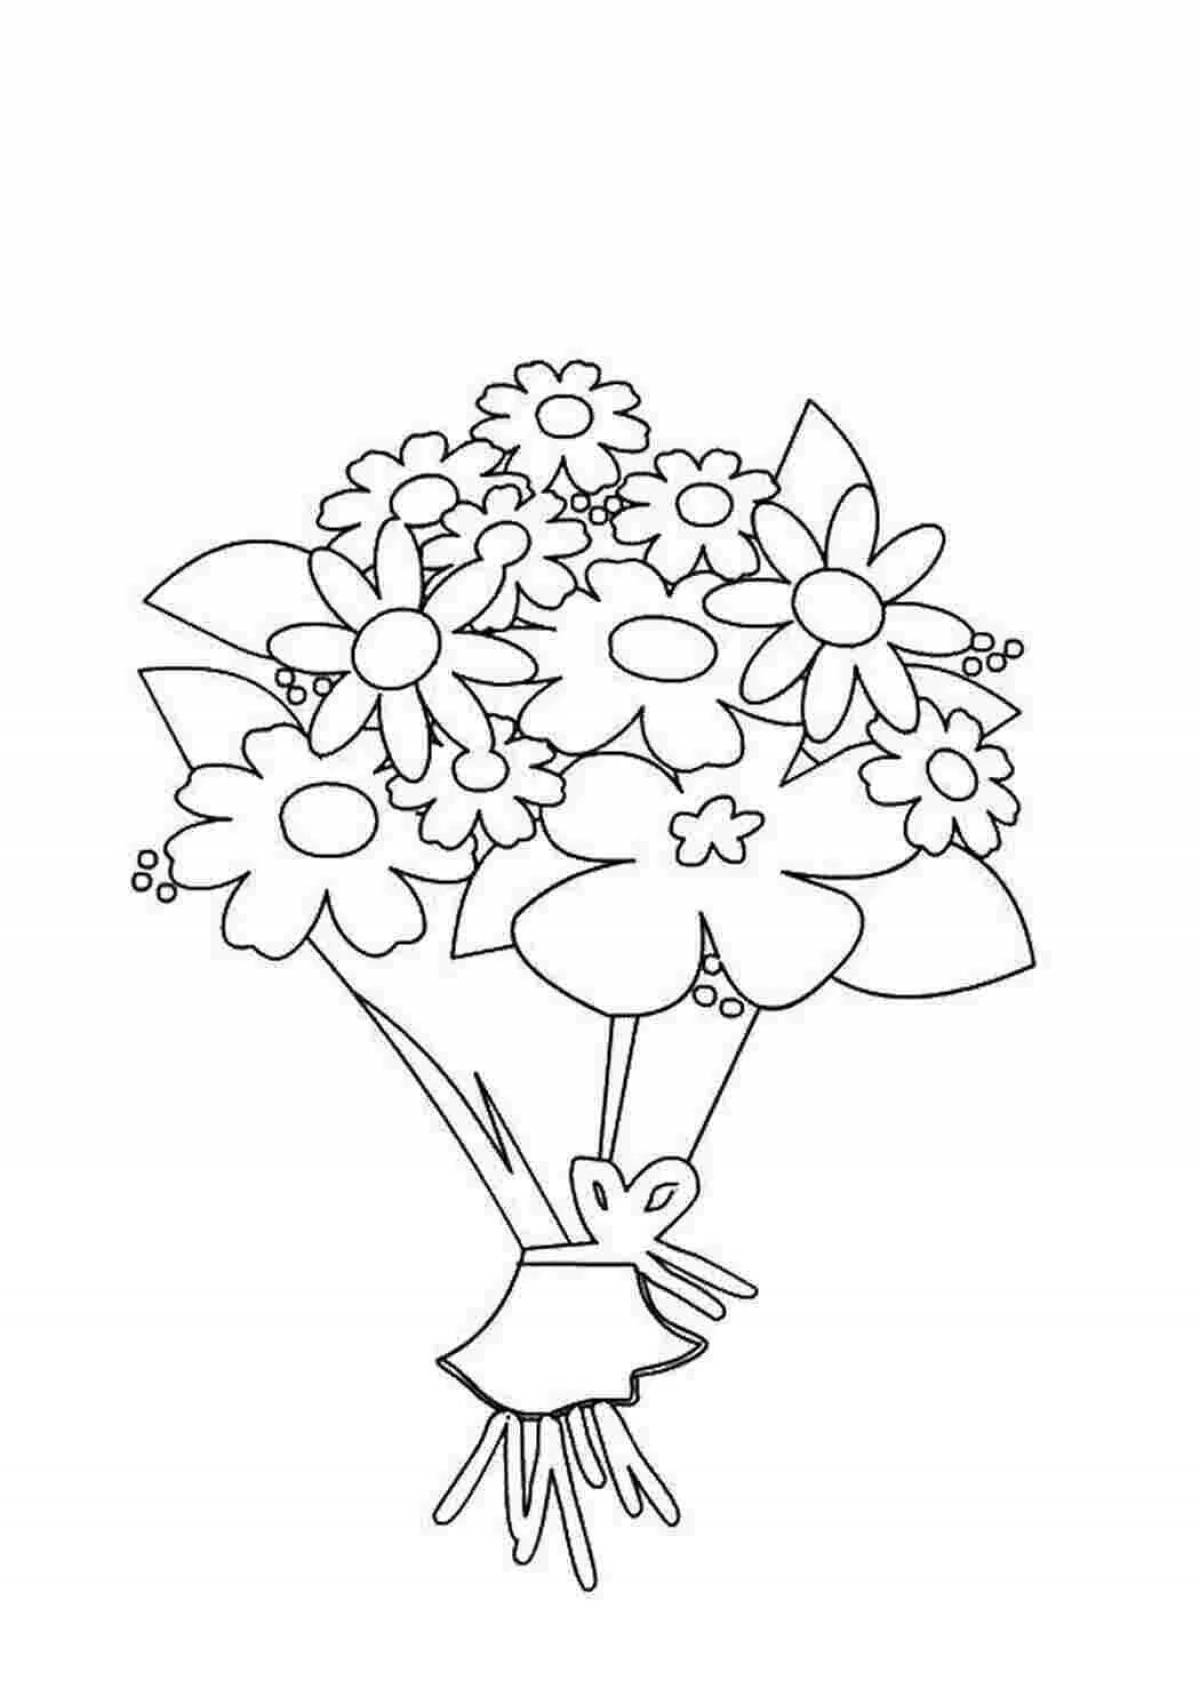 Delightful coloring book bouquet for mom